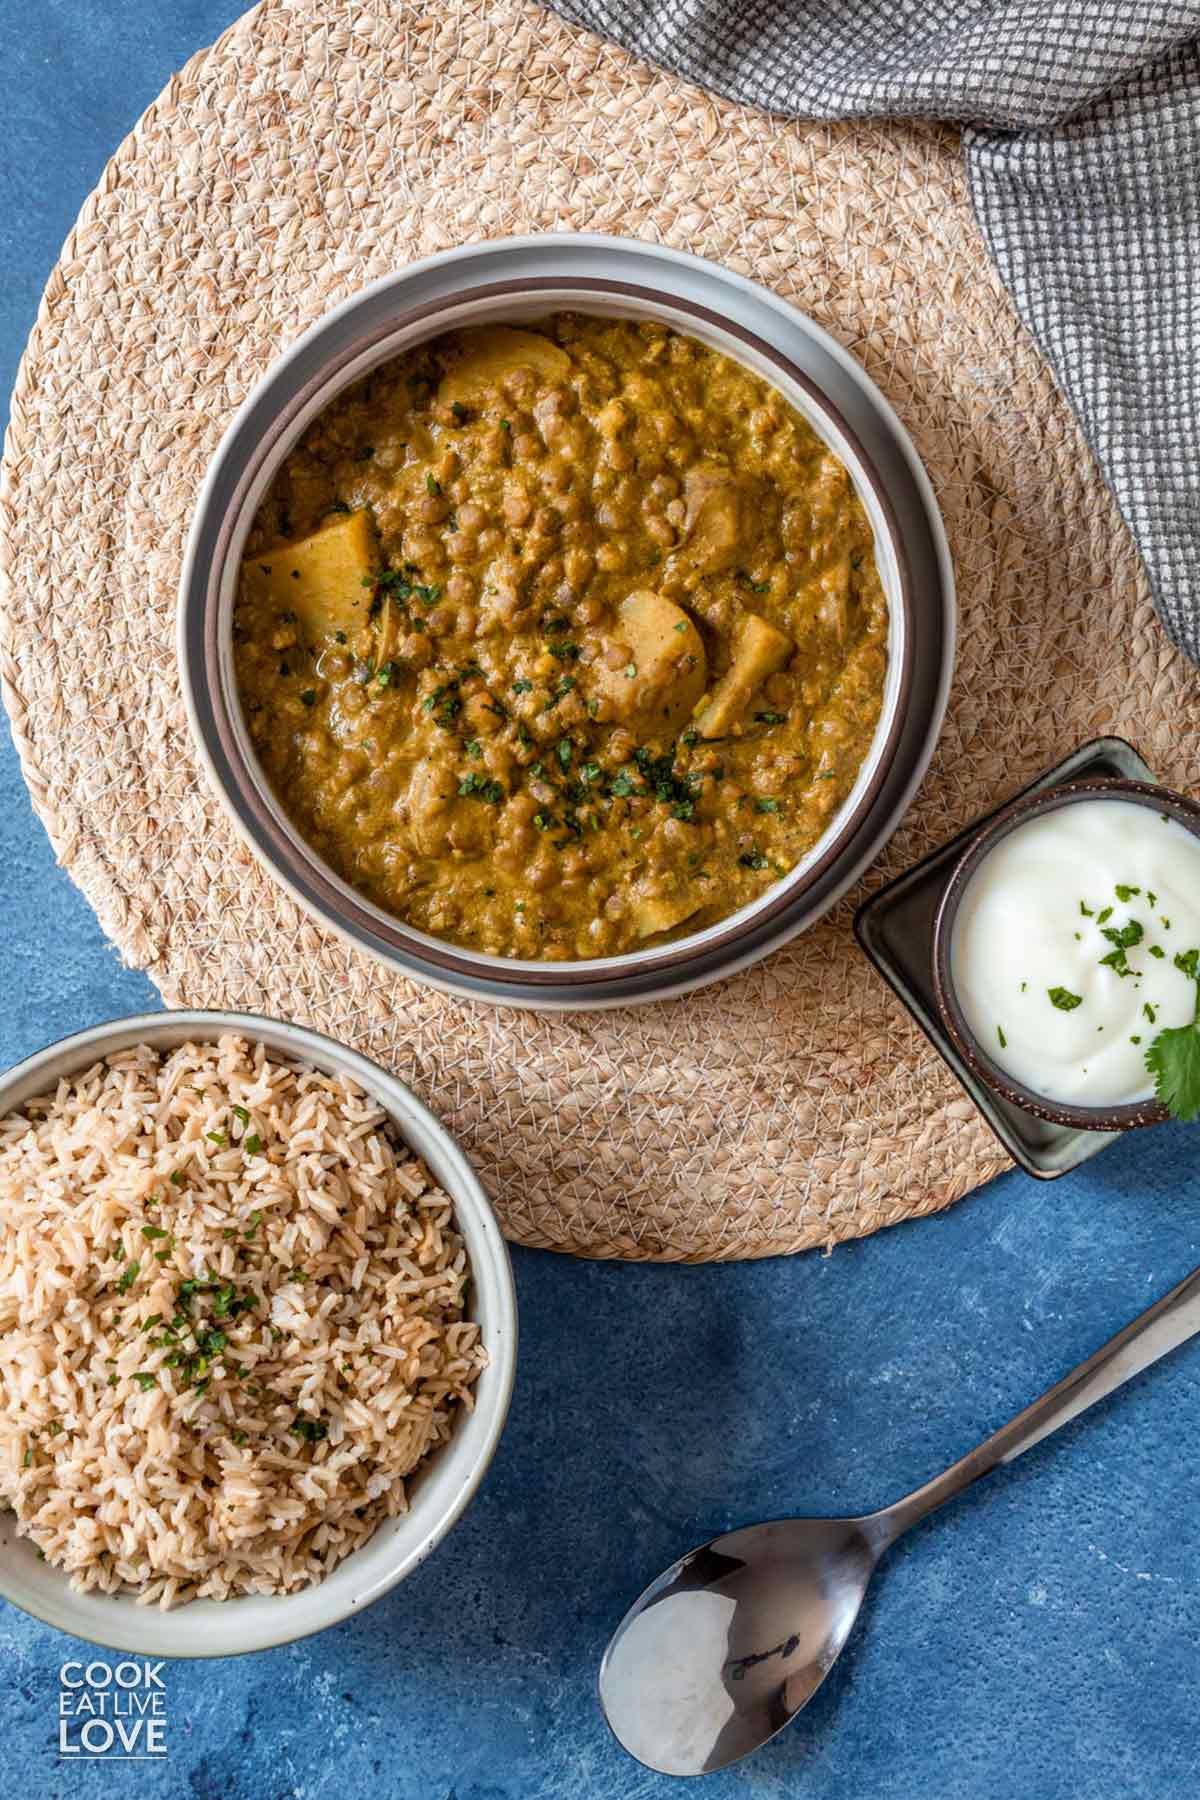 Lentil curry in a bowl on the table with a bowl of yogurt and a bowl of rice next to it.